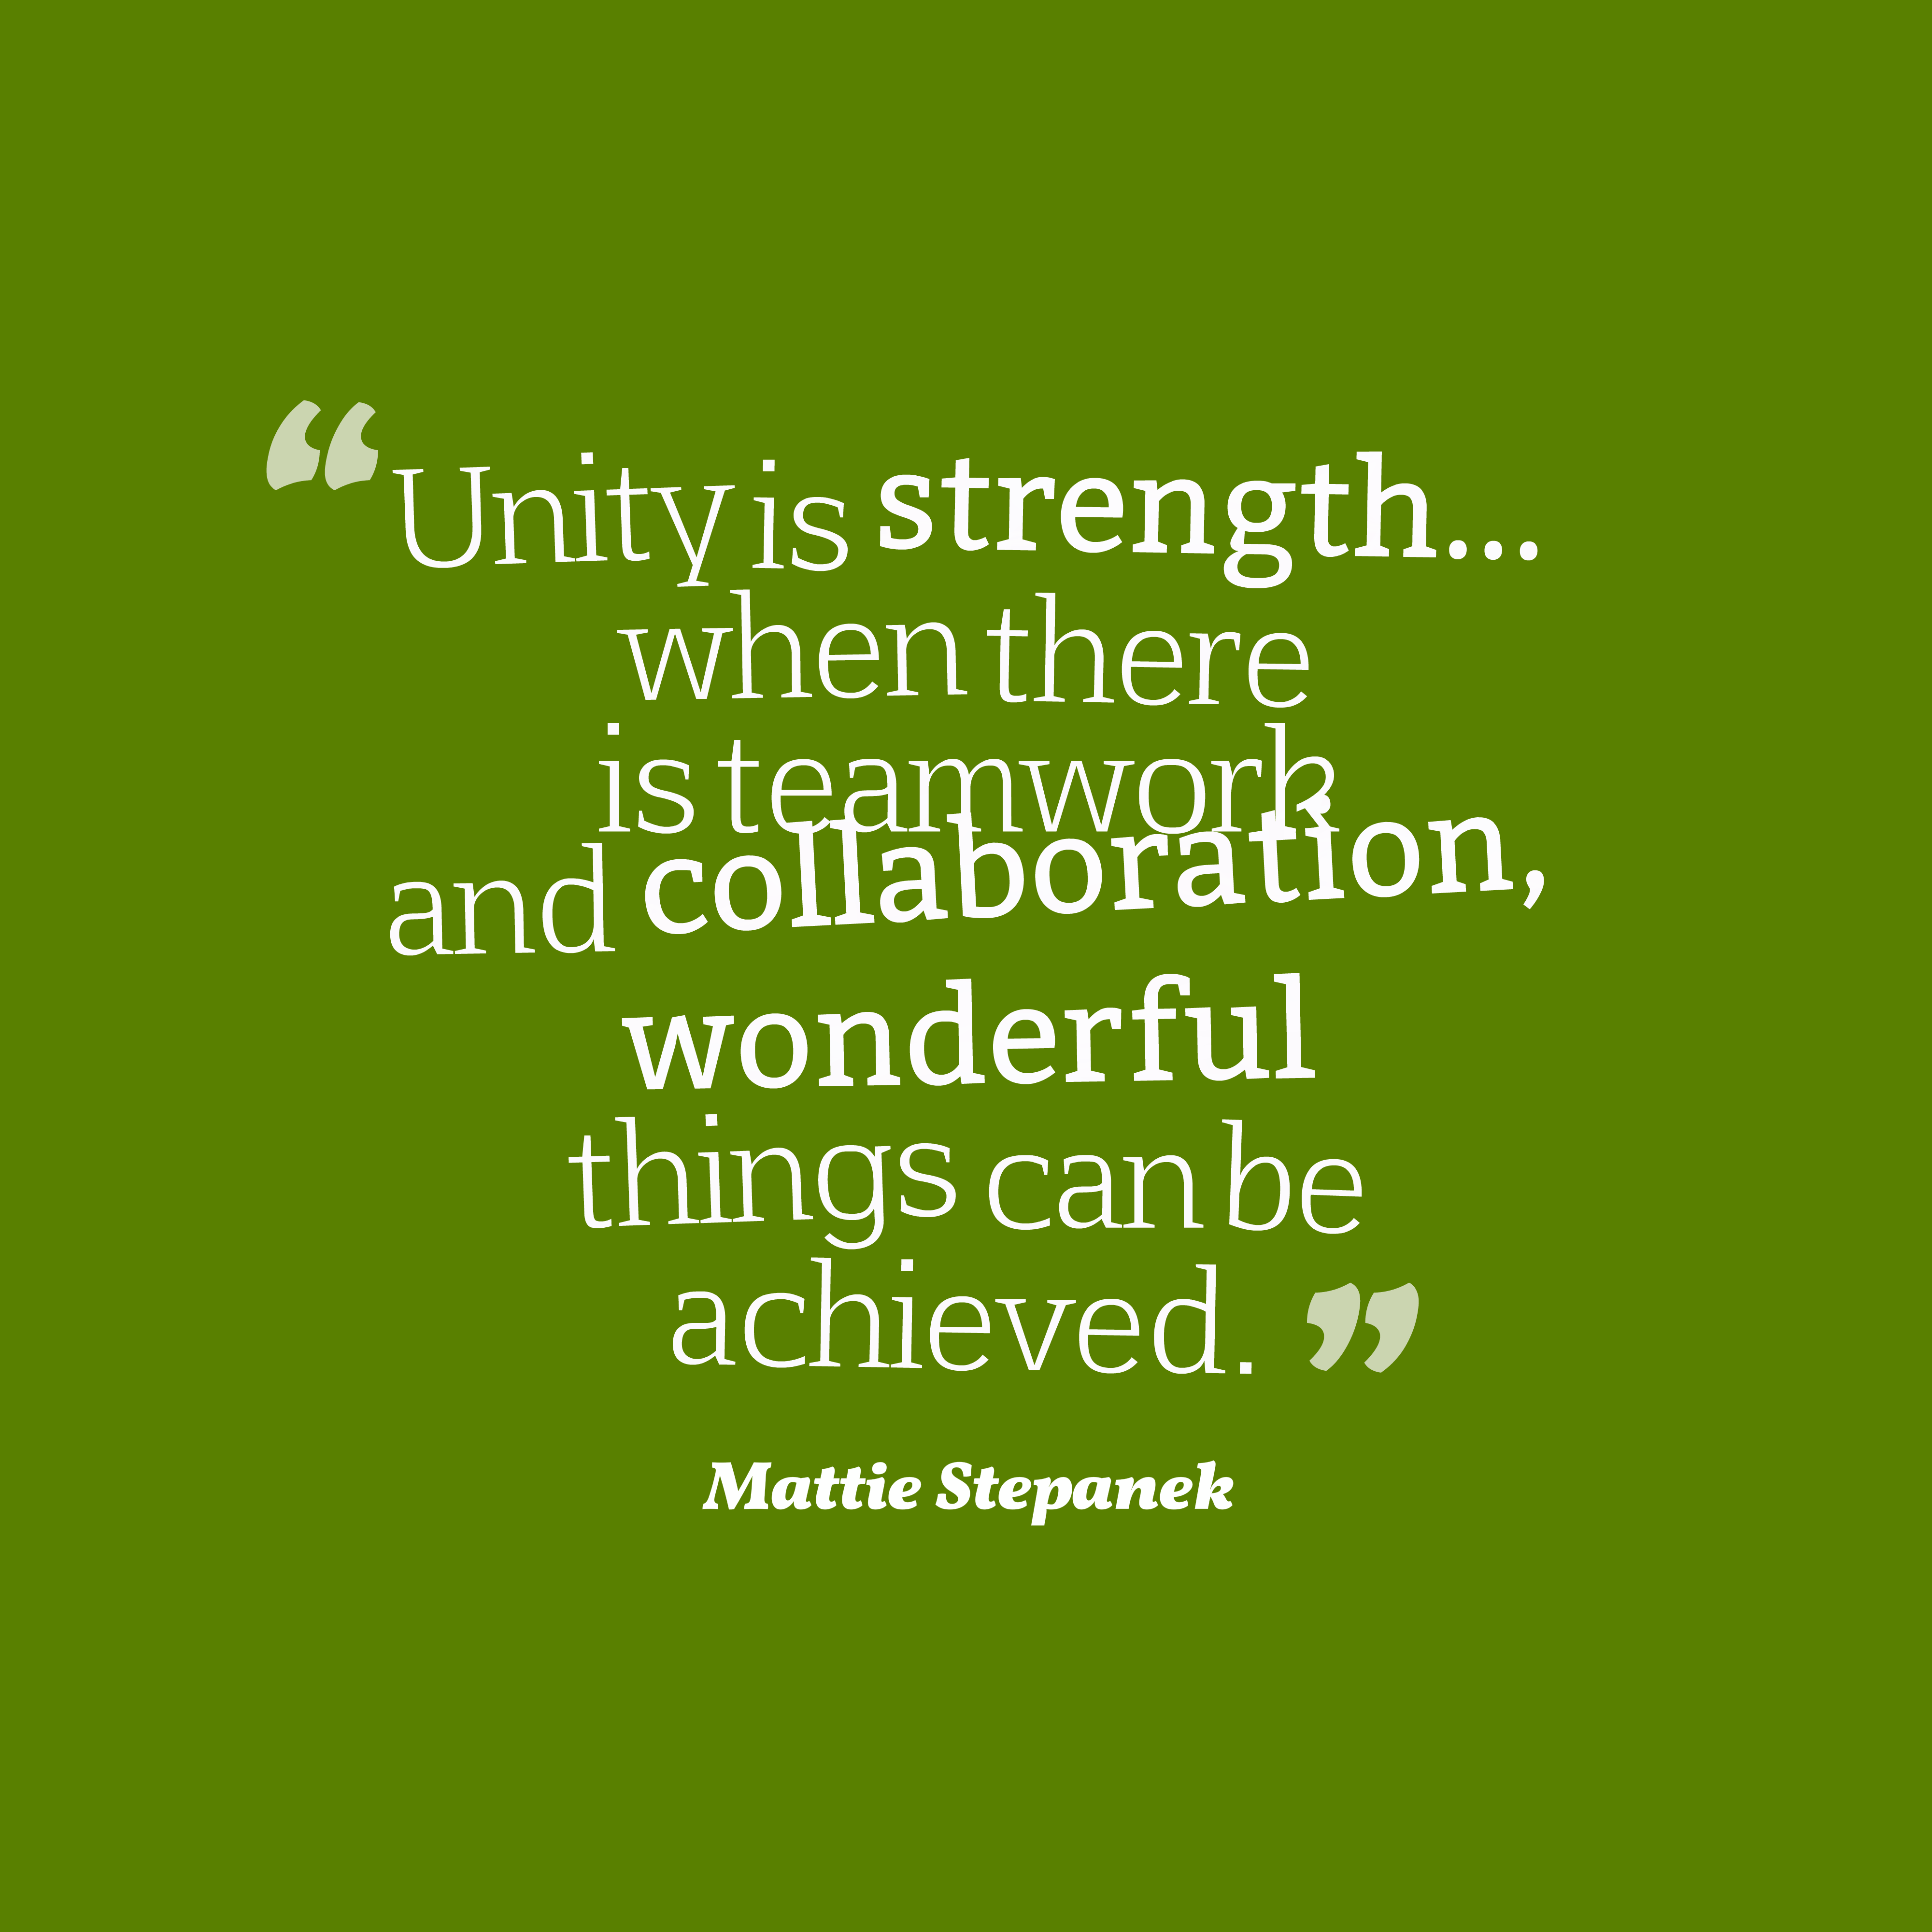 Unity is strength… when there is teamwork and collaboration, wonderful things can be achieved. mattie stepanek